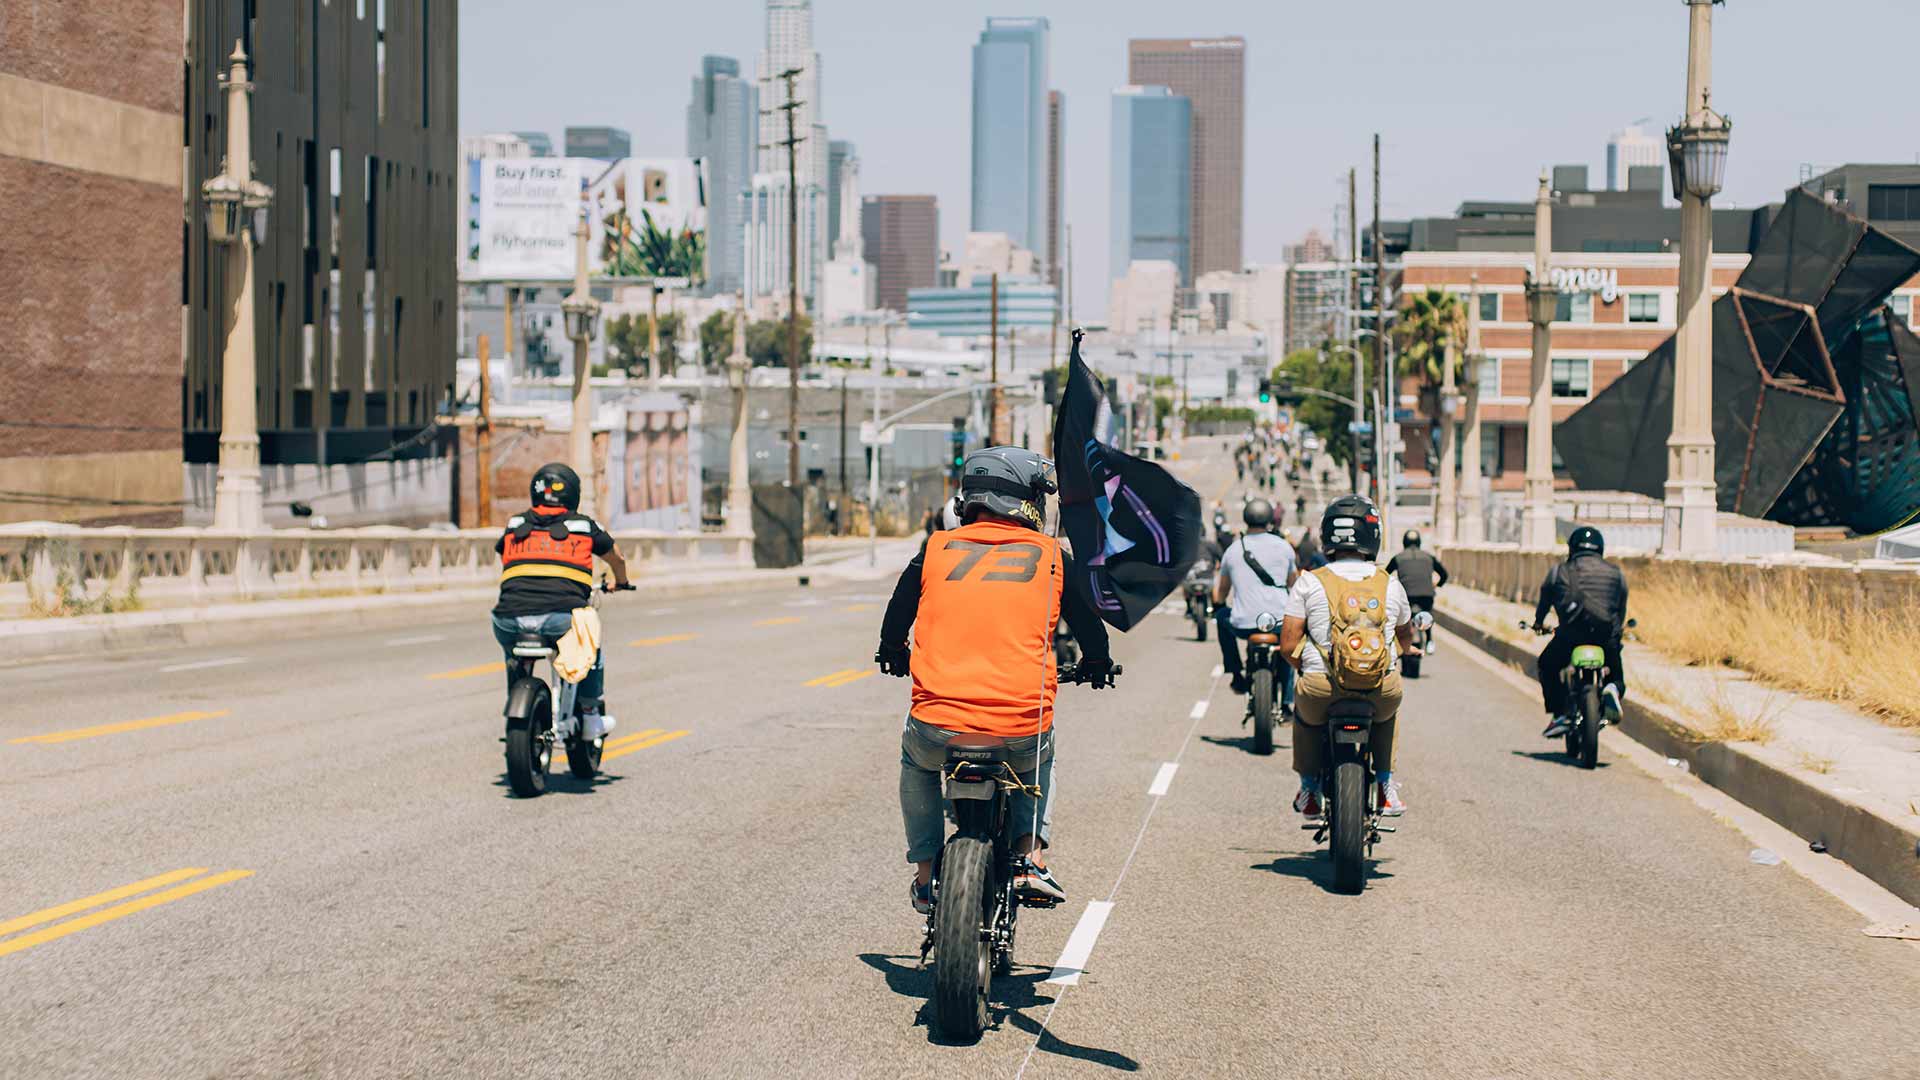 Group ride driving Super73 ebikes on urban streets